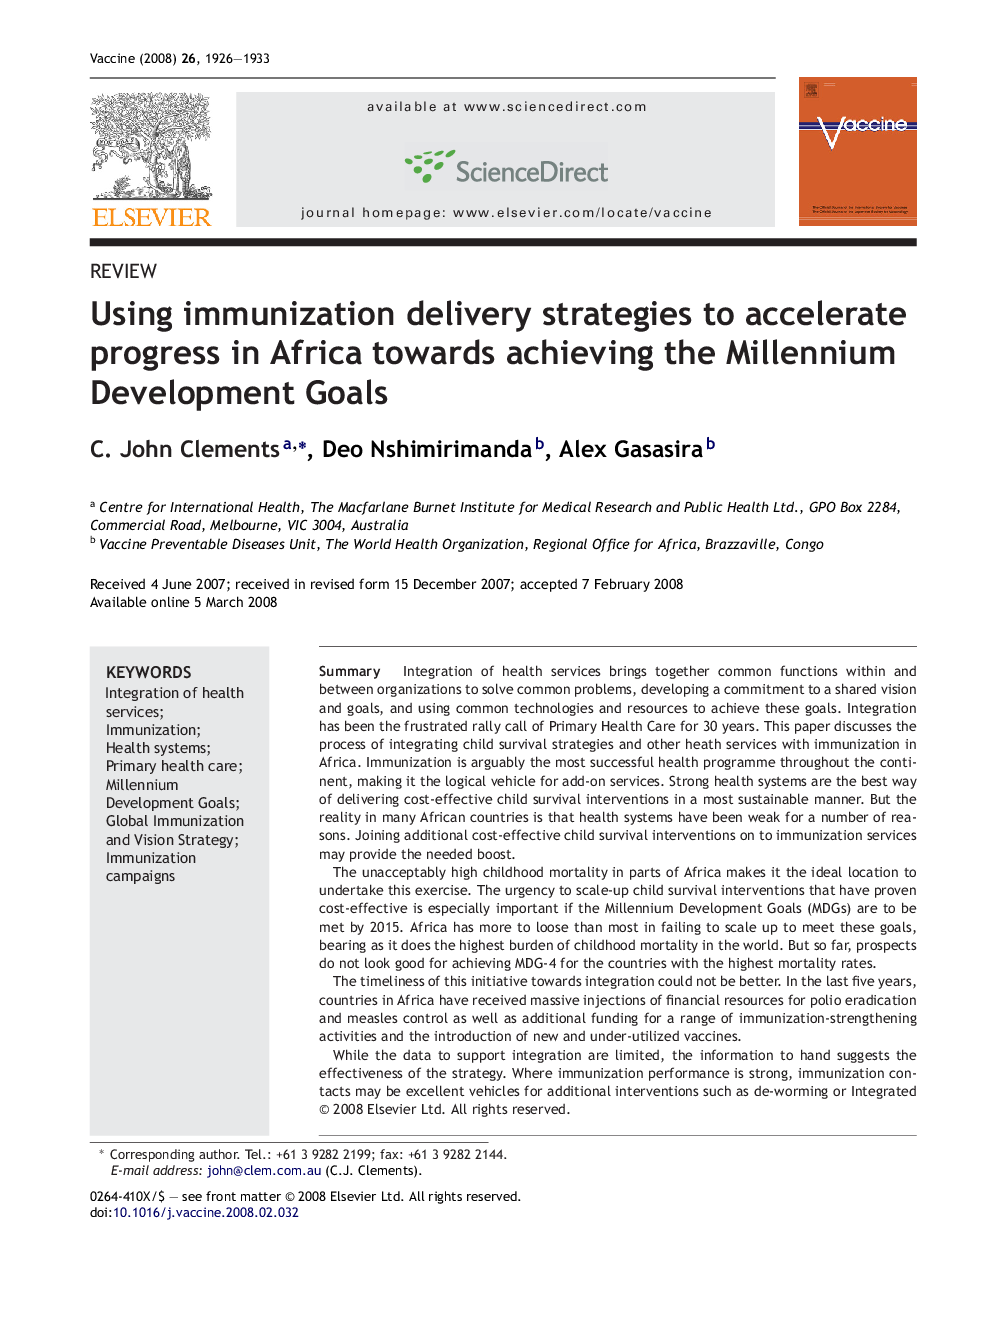 Using immunization delivery strategies to accelerate progress in Africa towards achieving the Millennium Development Goals